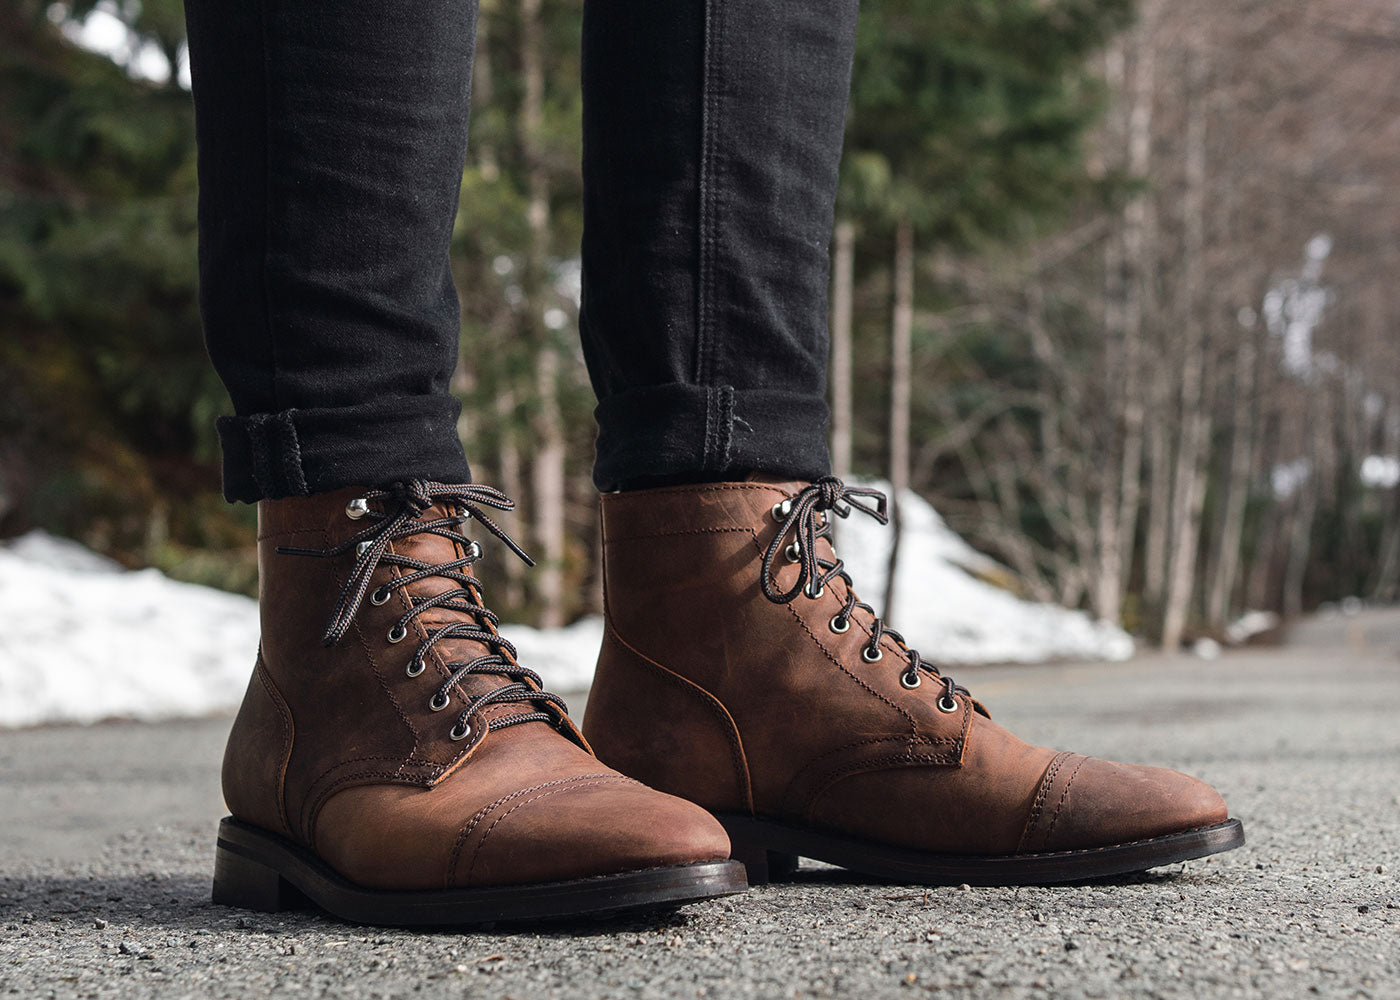 Most Stylish Waterproof Boots for Men